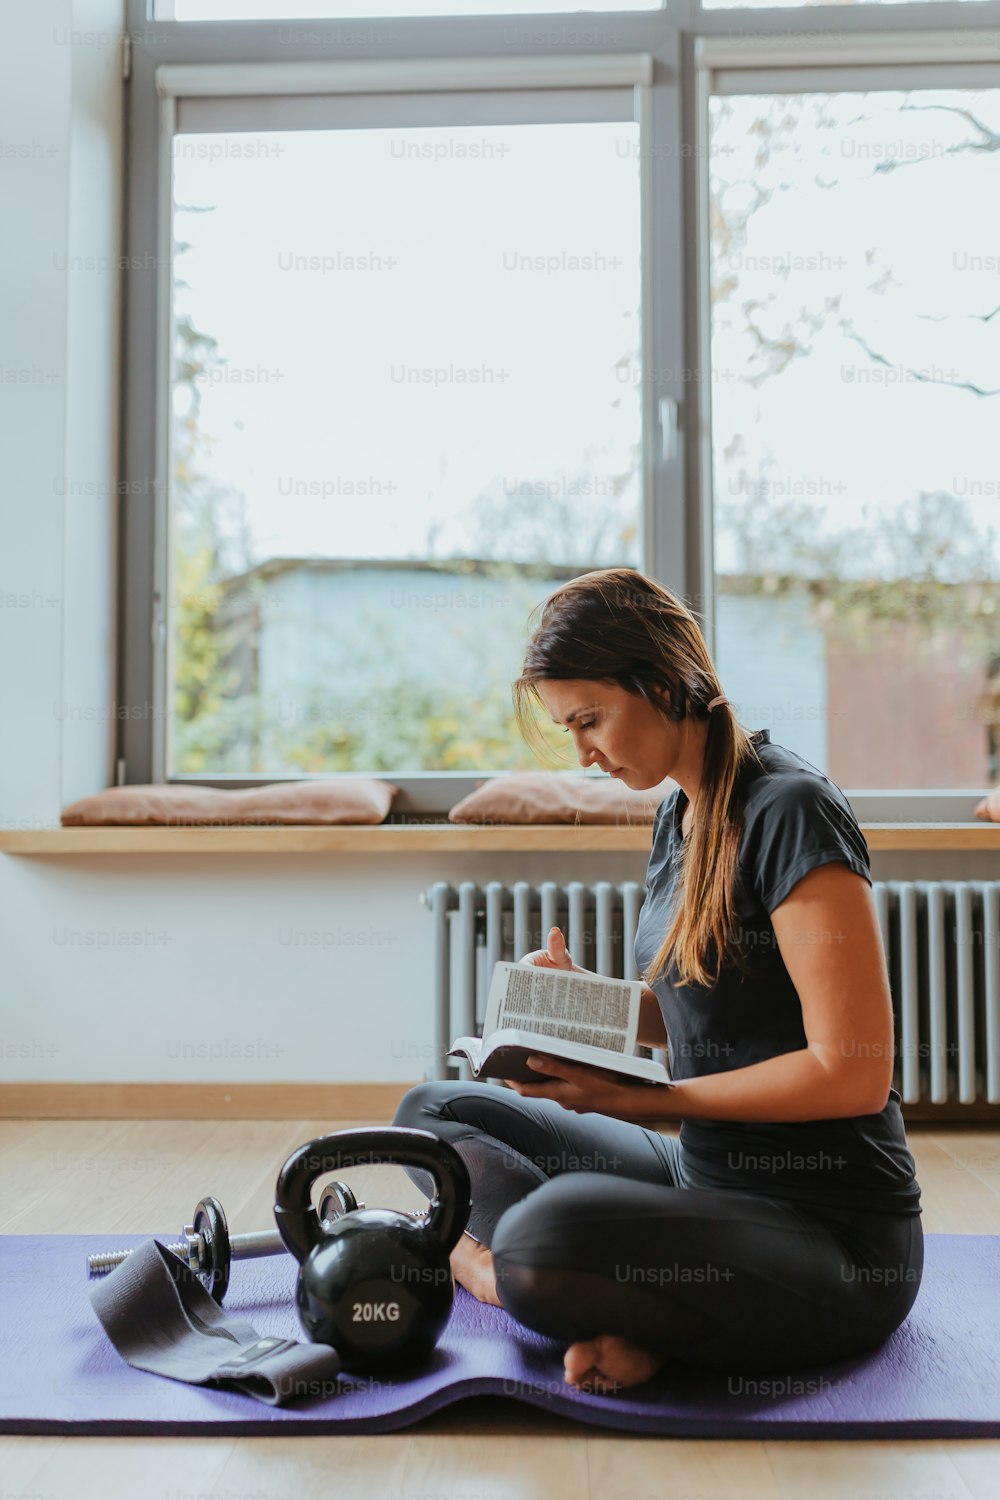 a person sitting on a yoga mat reading a book